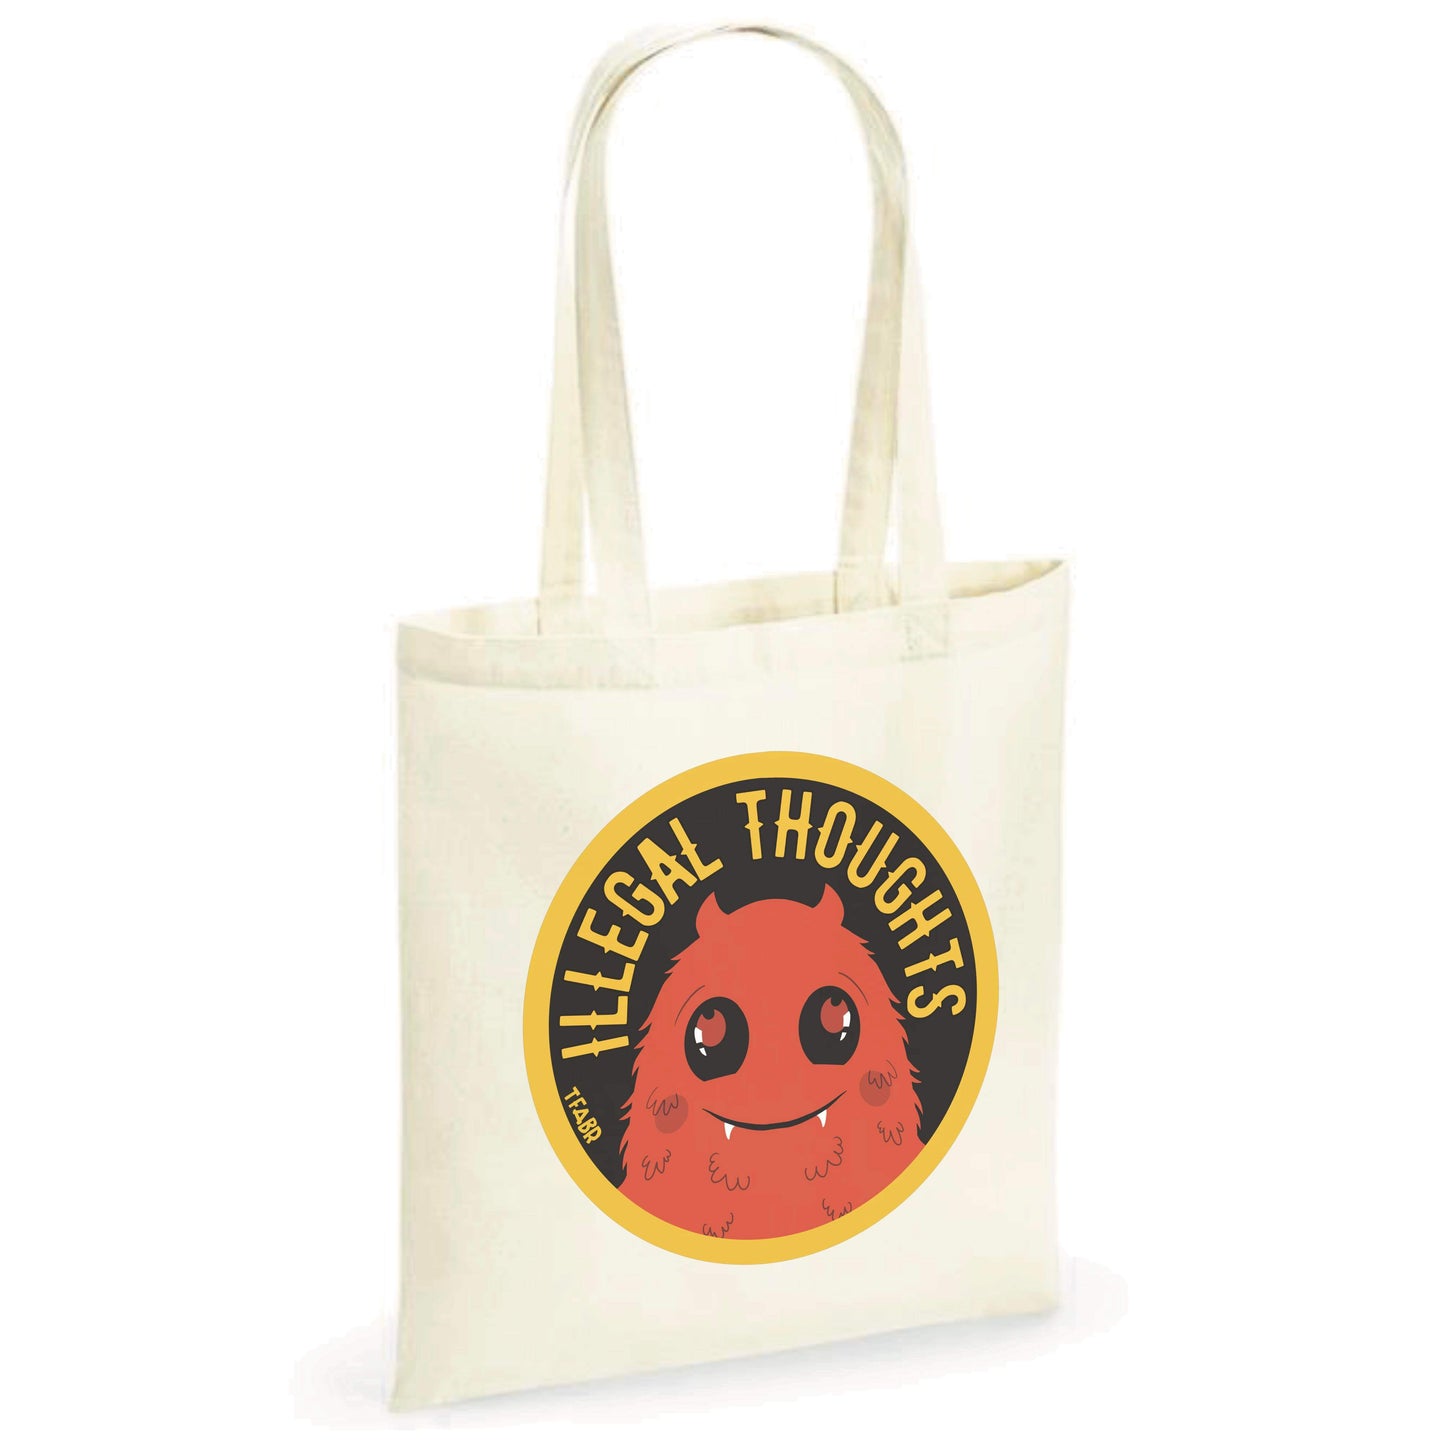 Illegal Thoughts! Tote Bag